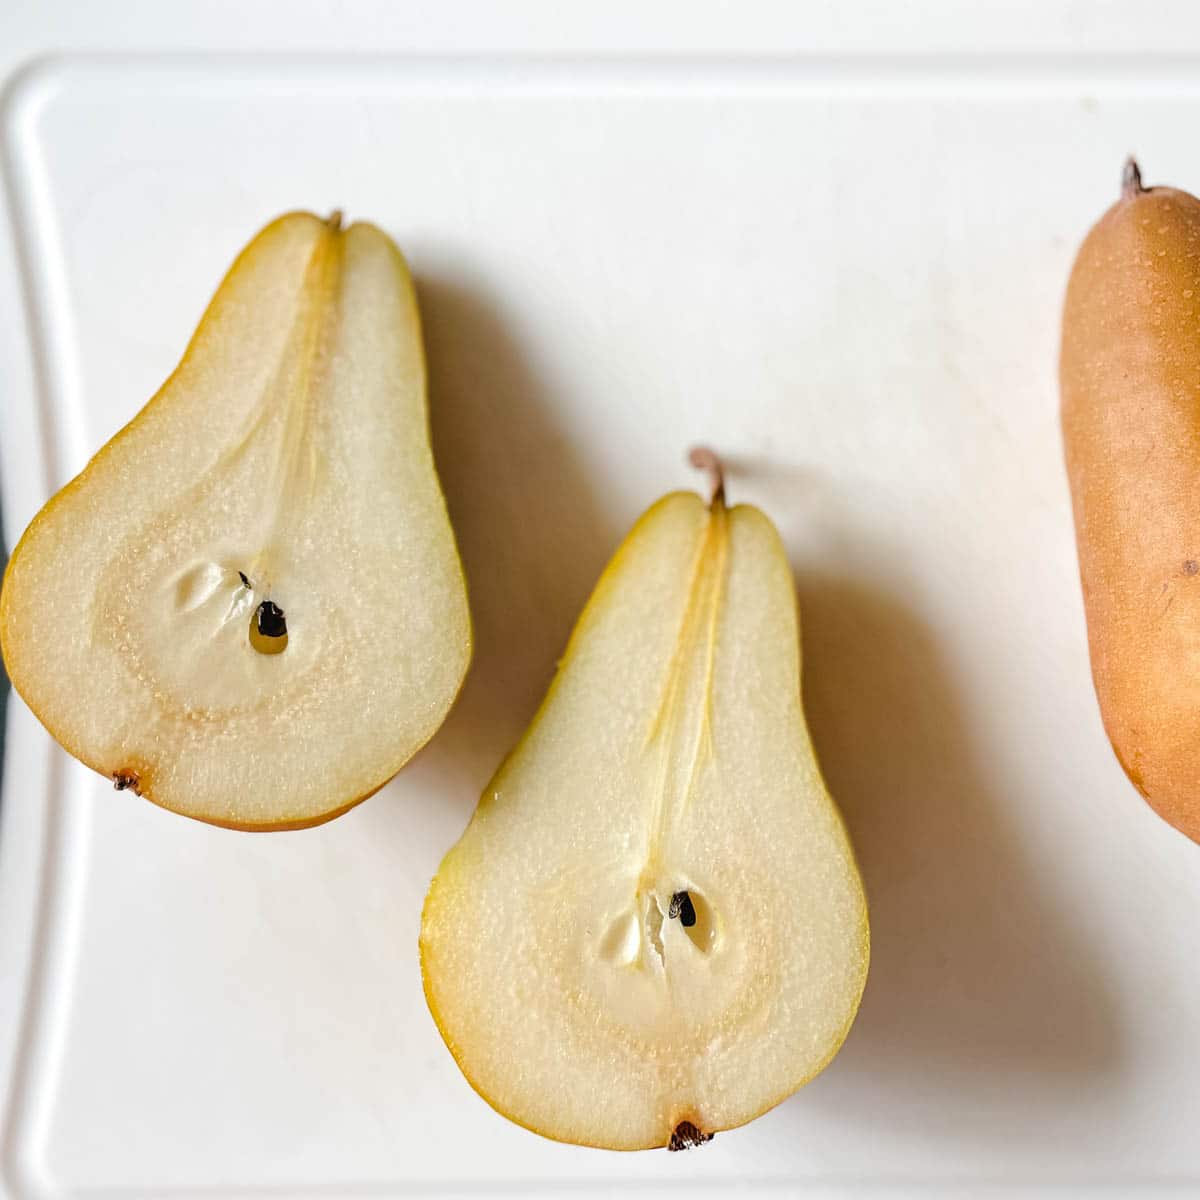 Image shows a halved pear on a white cutting board.